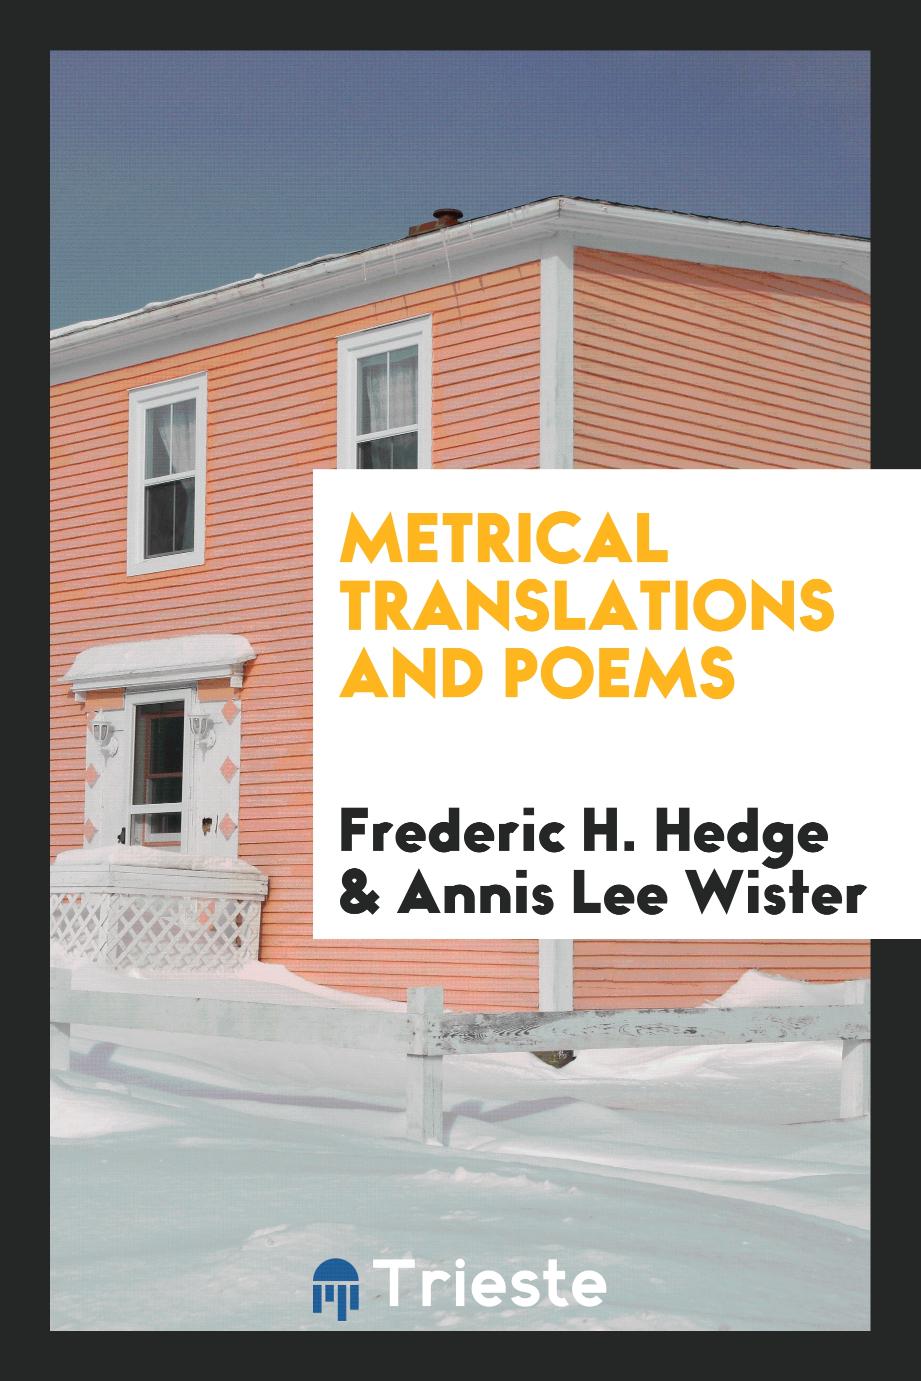 Metrical Translations and Poems